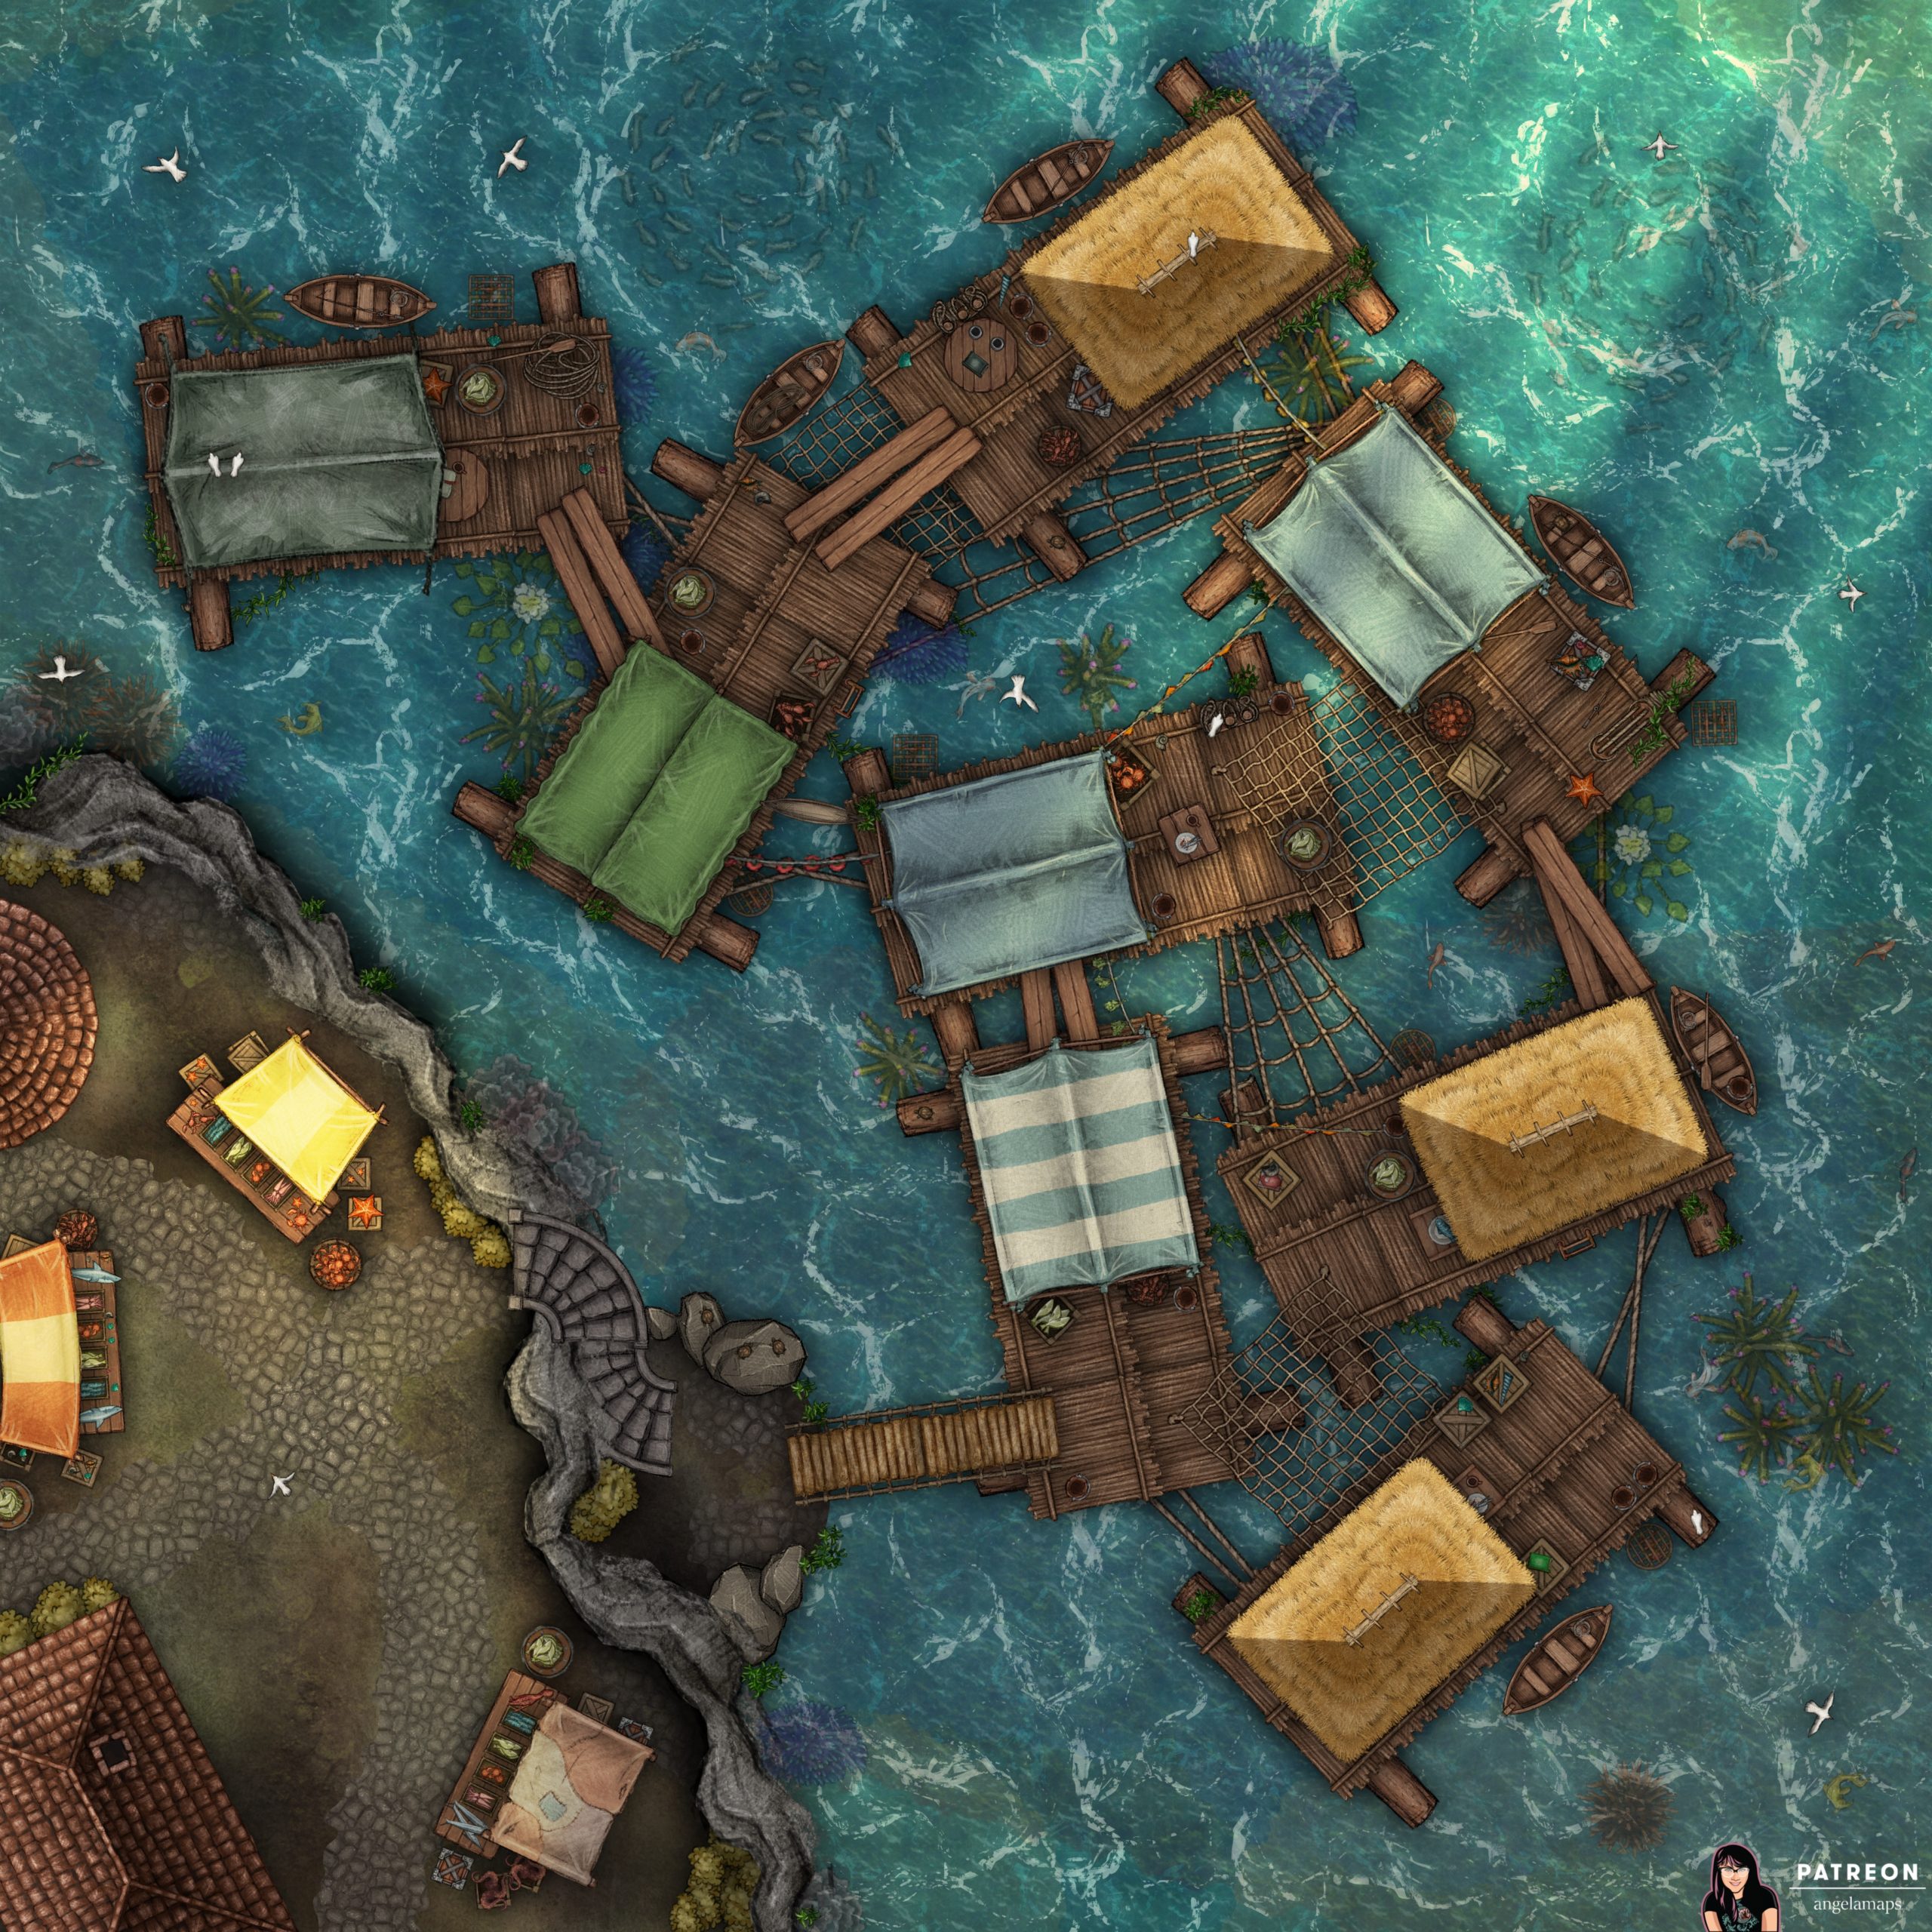 Floating fishing village battle map encounter for D&D or pathfinder and other TTRPGs